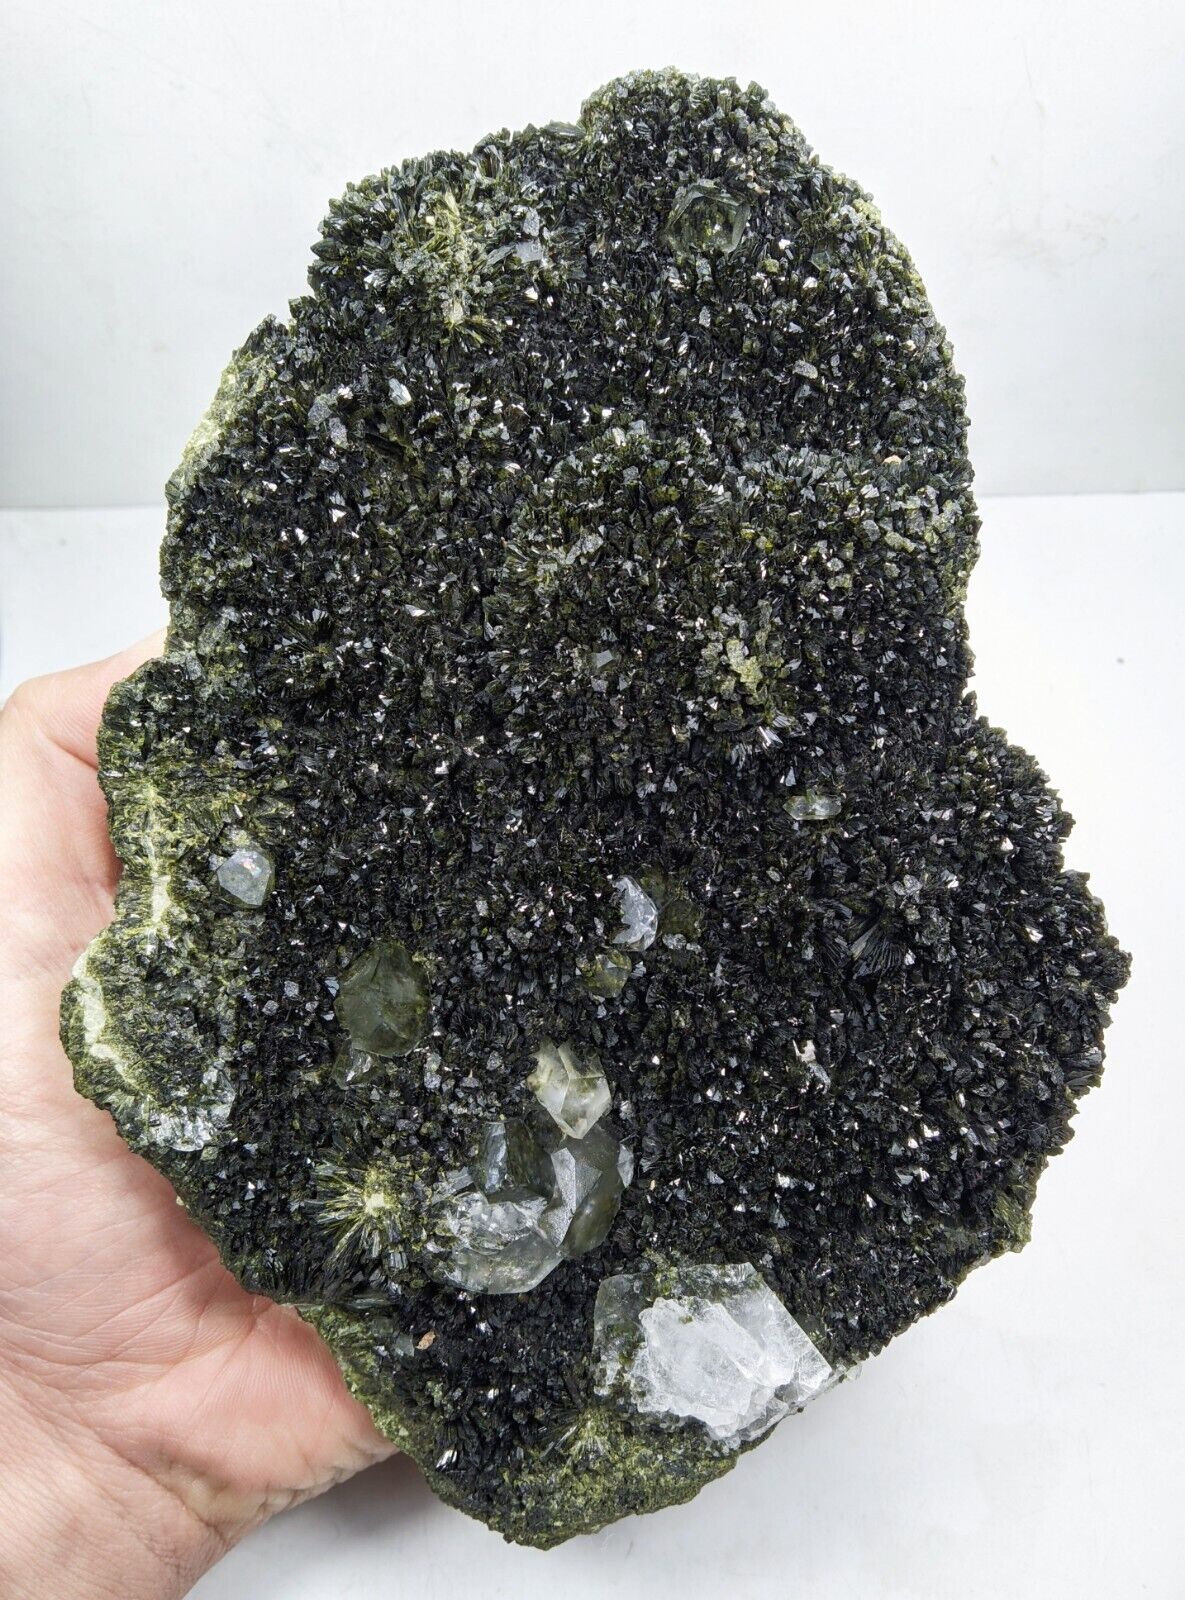 Cabinet Size Epidote Cluster With Quartz Cluster On Matrix Having Shining Luster